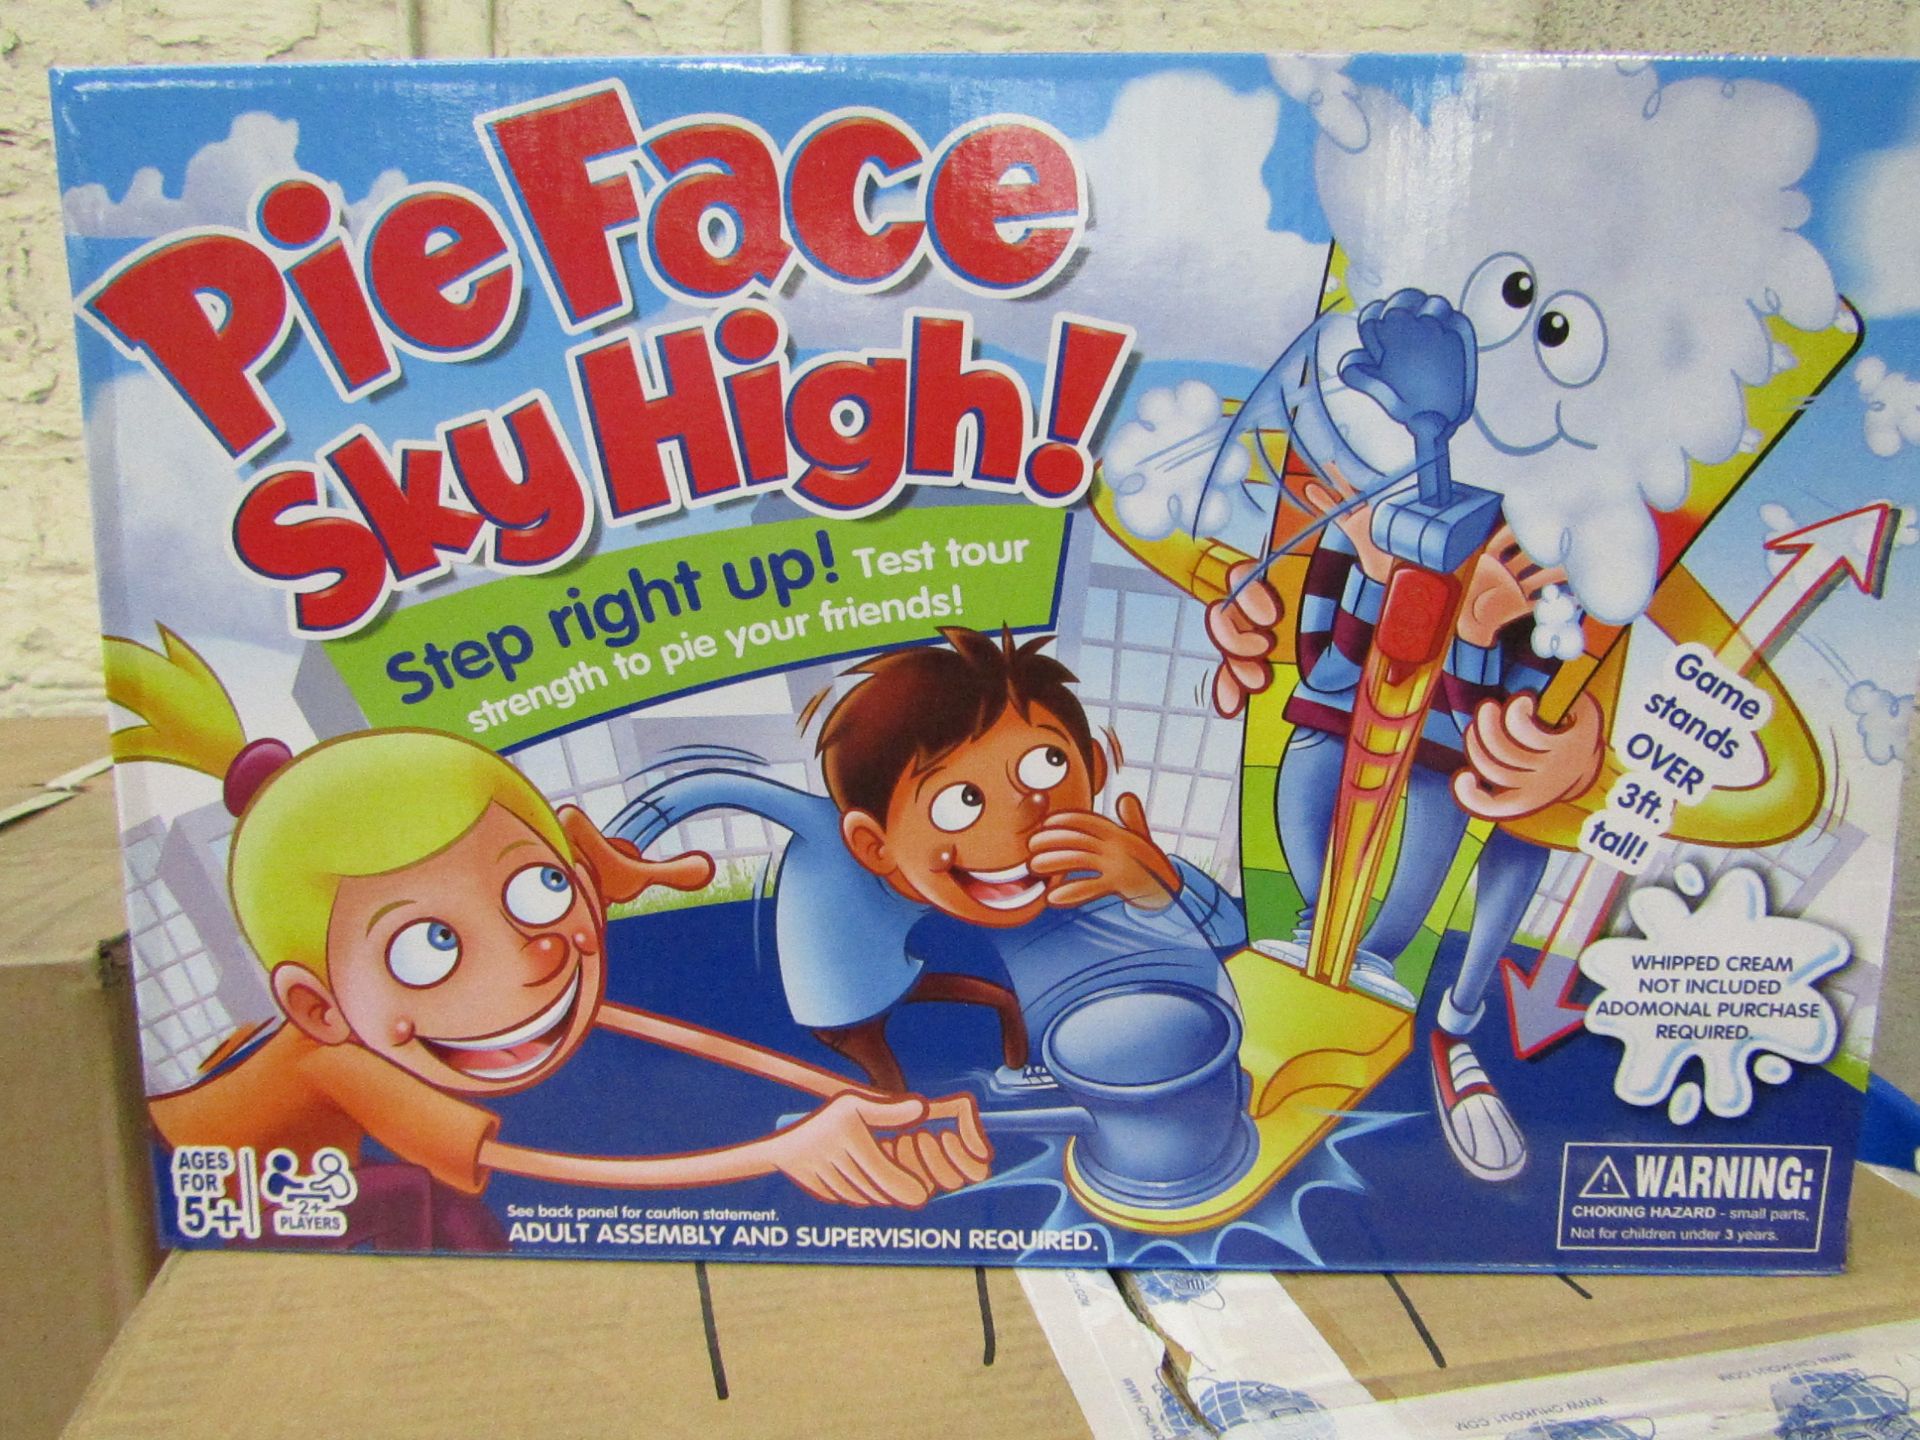 Pie Face Sky High Game. Over 3ft Tall.New & Boxed. Ideal Christmas Game!